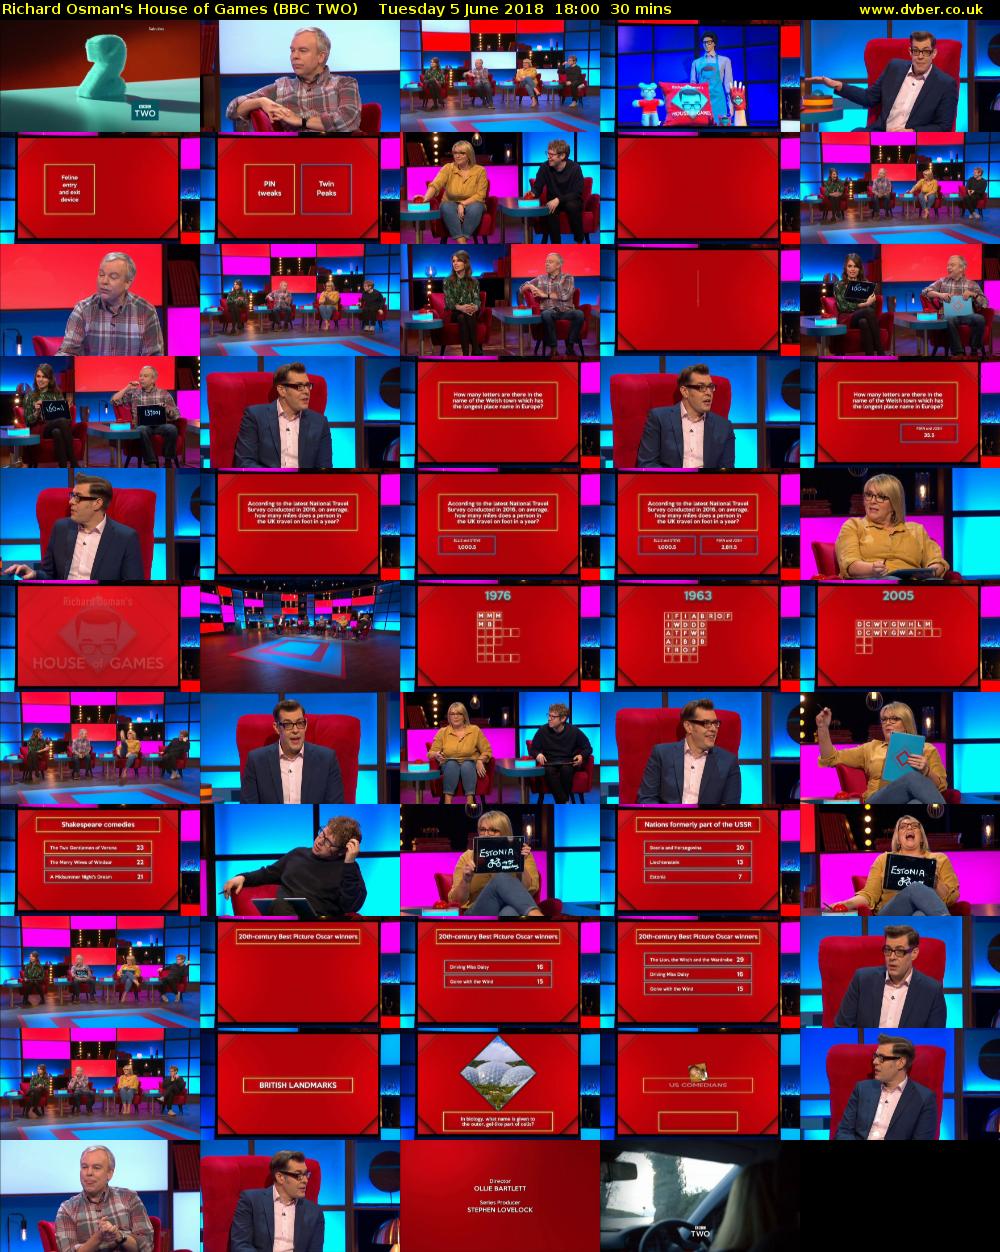 Richard Osman's House of Games (BBC TWO) Tuesday 5 June 2018 18:00 - 18:30